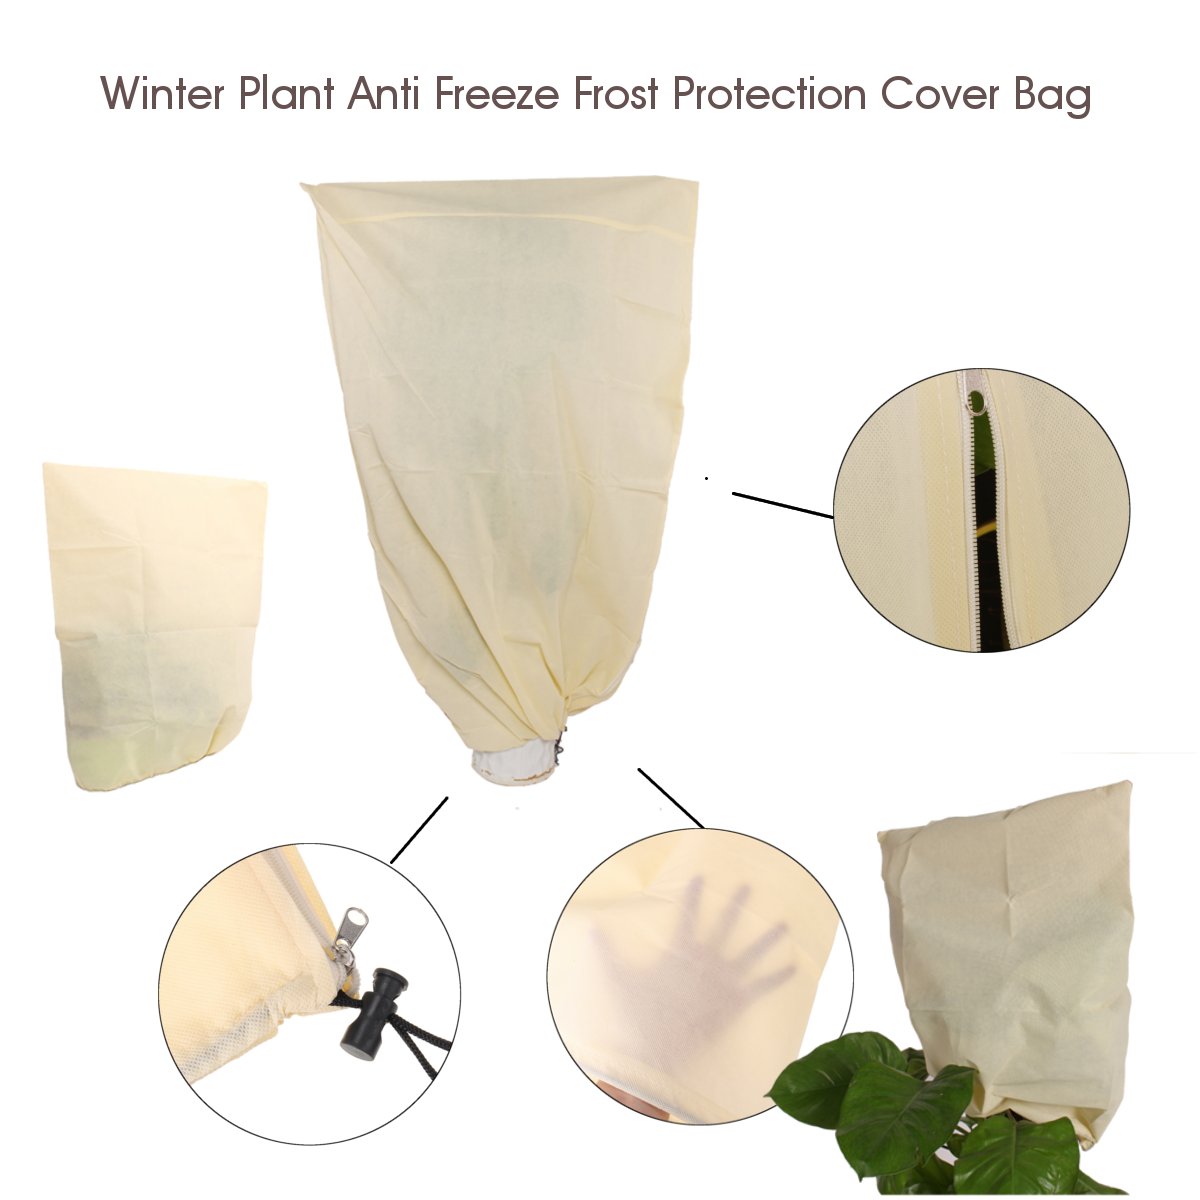 Frost-Plant-Warm-Cover-Tree-Shrub-Plant-Protection-Bag-Yard-Garden-Decor-Winter-Container-1590365-4